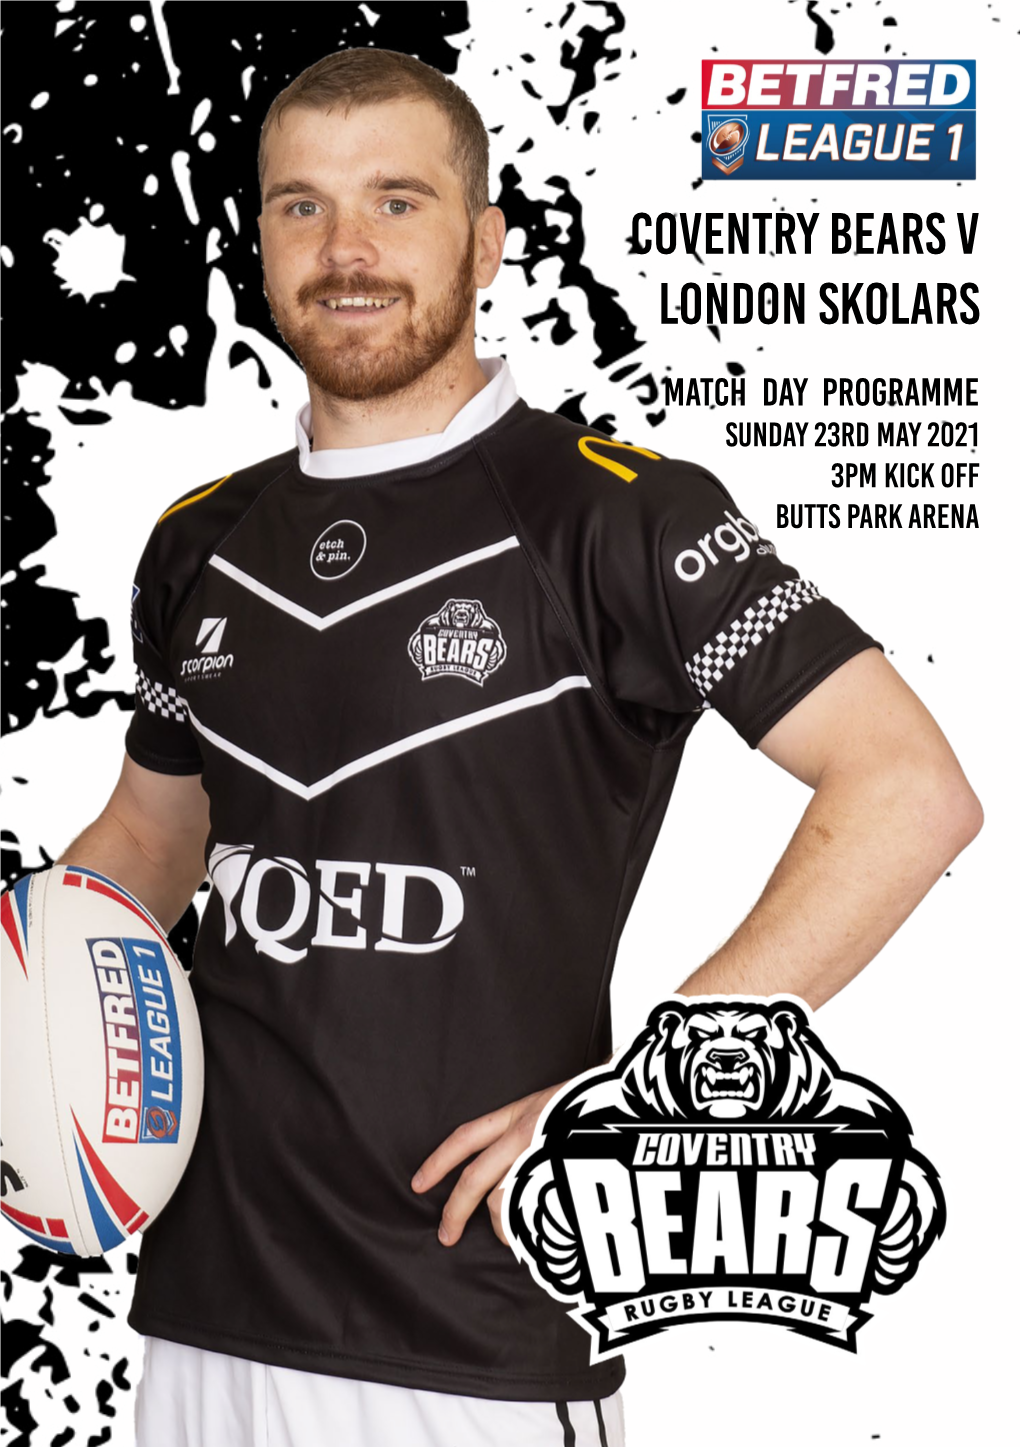 Coventry Bears V LONDON SKOLARS Match Day PROGRAMME Sunday 23RD MAY 2021 3Pm Kick Off Butts Park Arena Fixtures Welcome